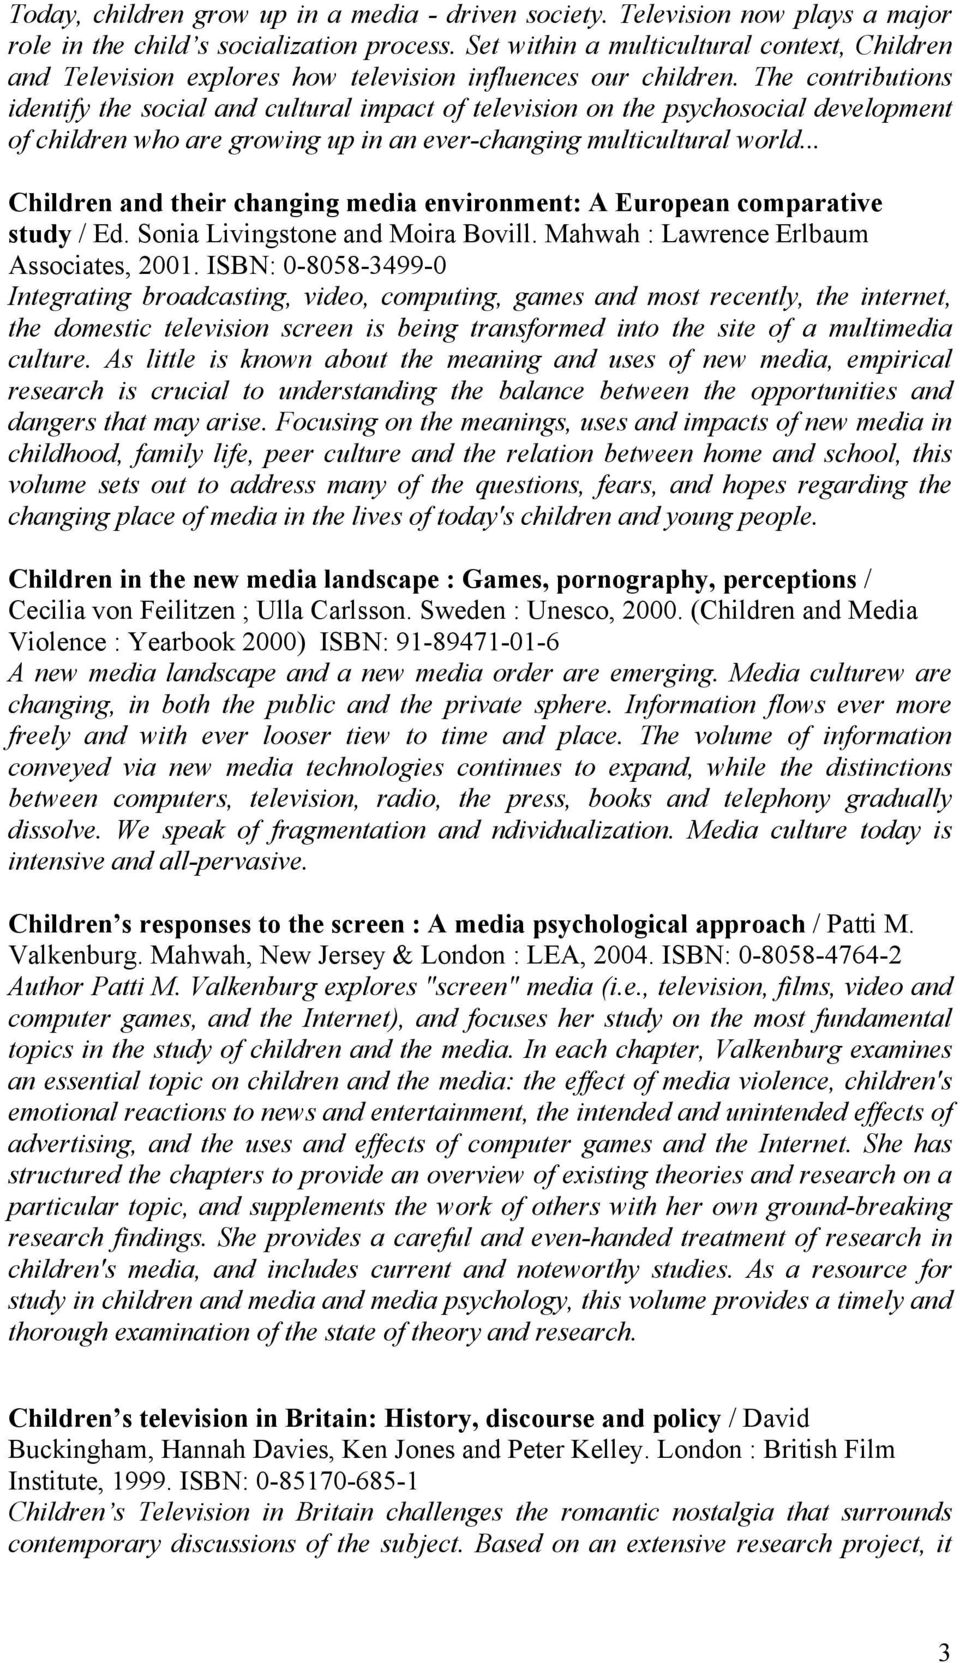 The contributions identify the social and cultural impact of television on the psychosocial development of children who are growing up in an ever-changing multicultural world.